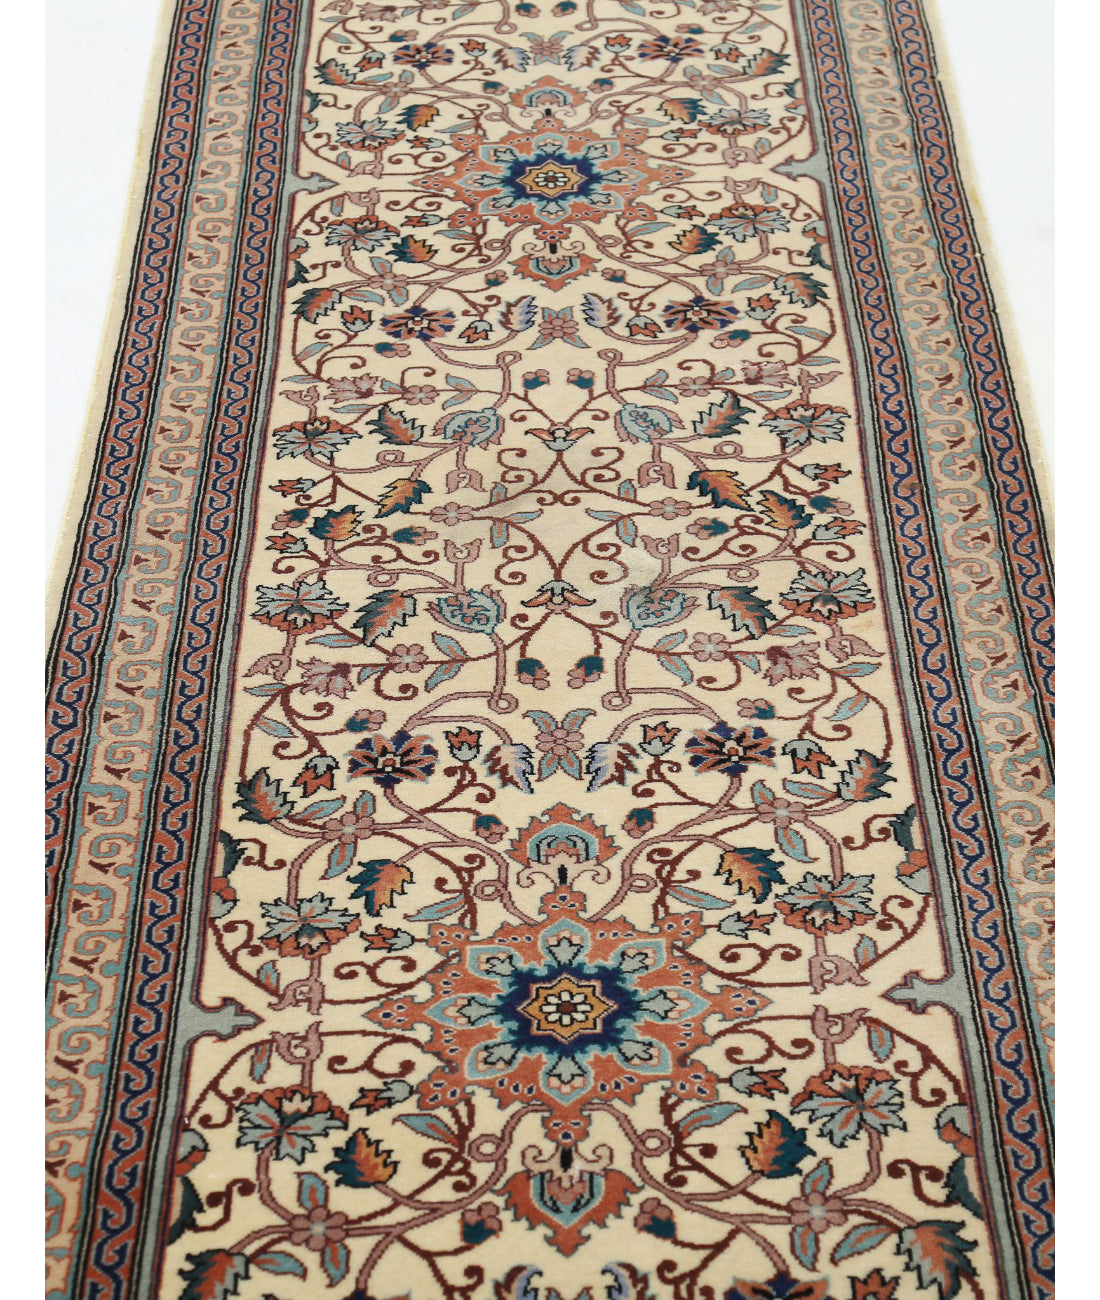 Heritage 2'6'' X 19'10'' Hand-Knotted Wool Rug 2'6'' x 19'10'' (75 X 595) / Beige / Green